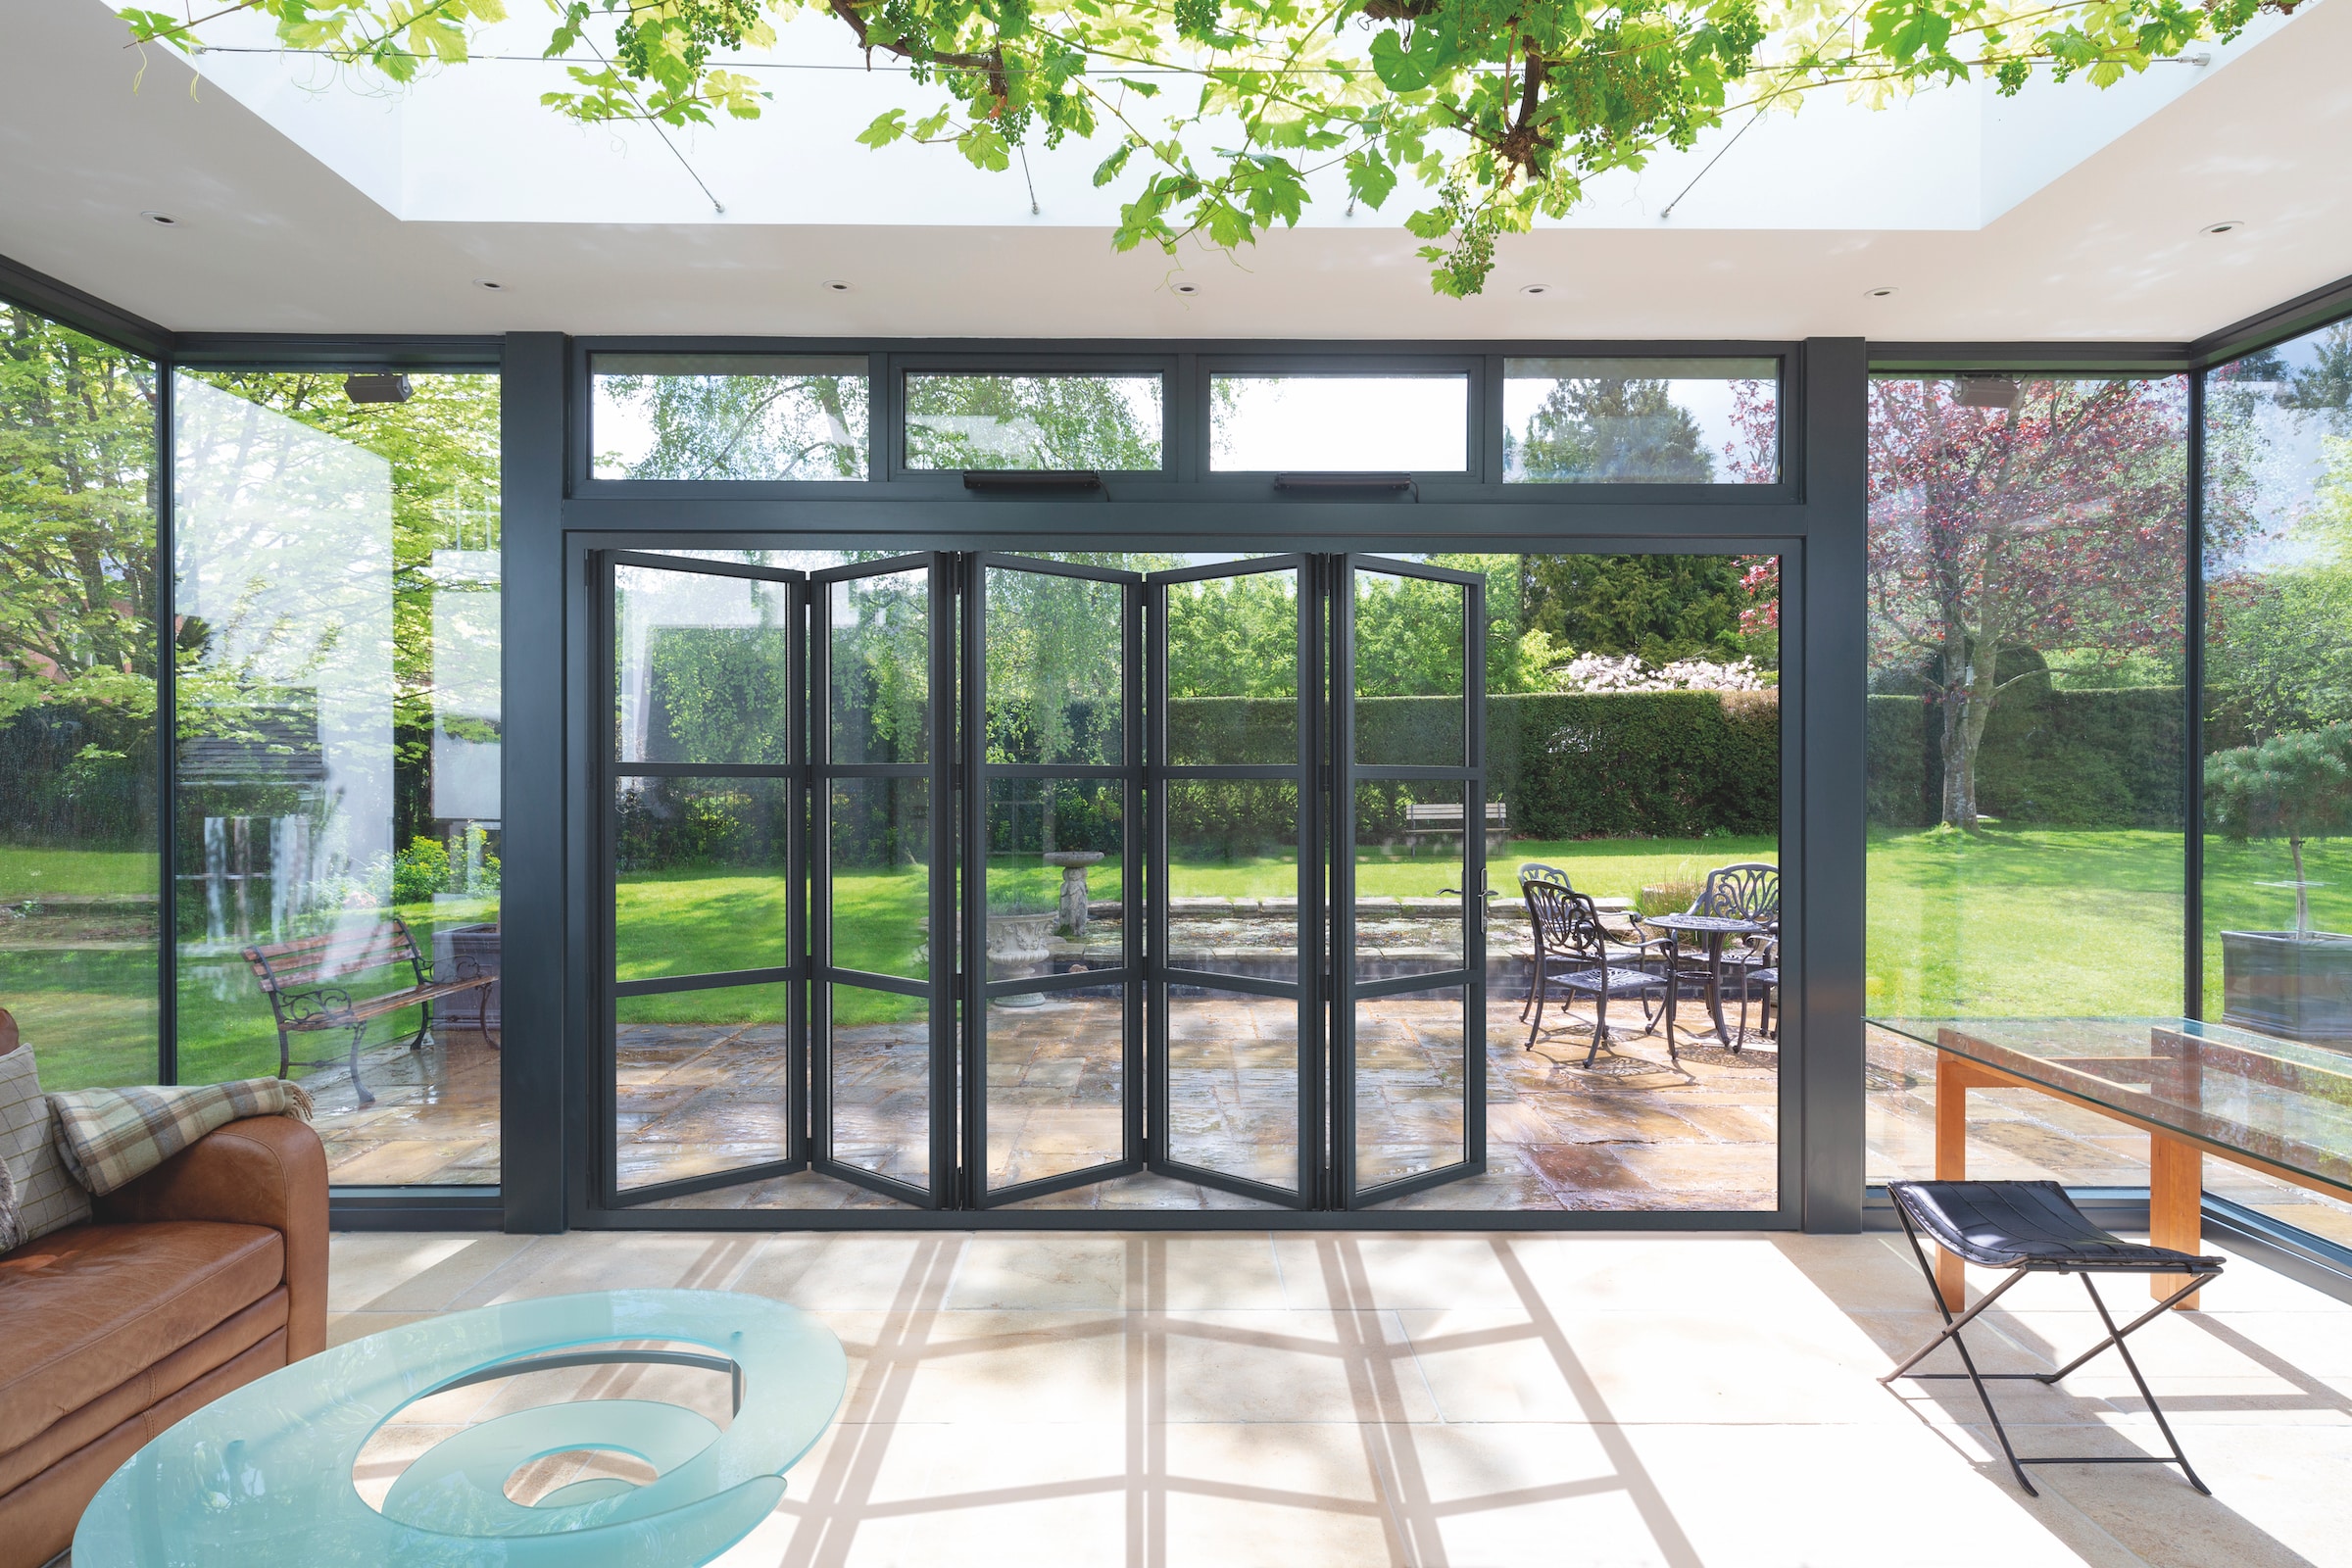 Aluco bifold doors in a conservatory, partially open with patio and garden view and sky